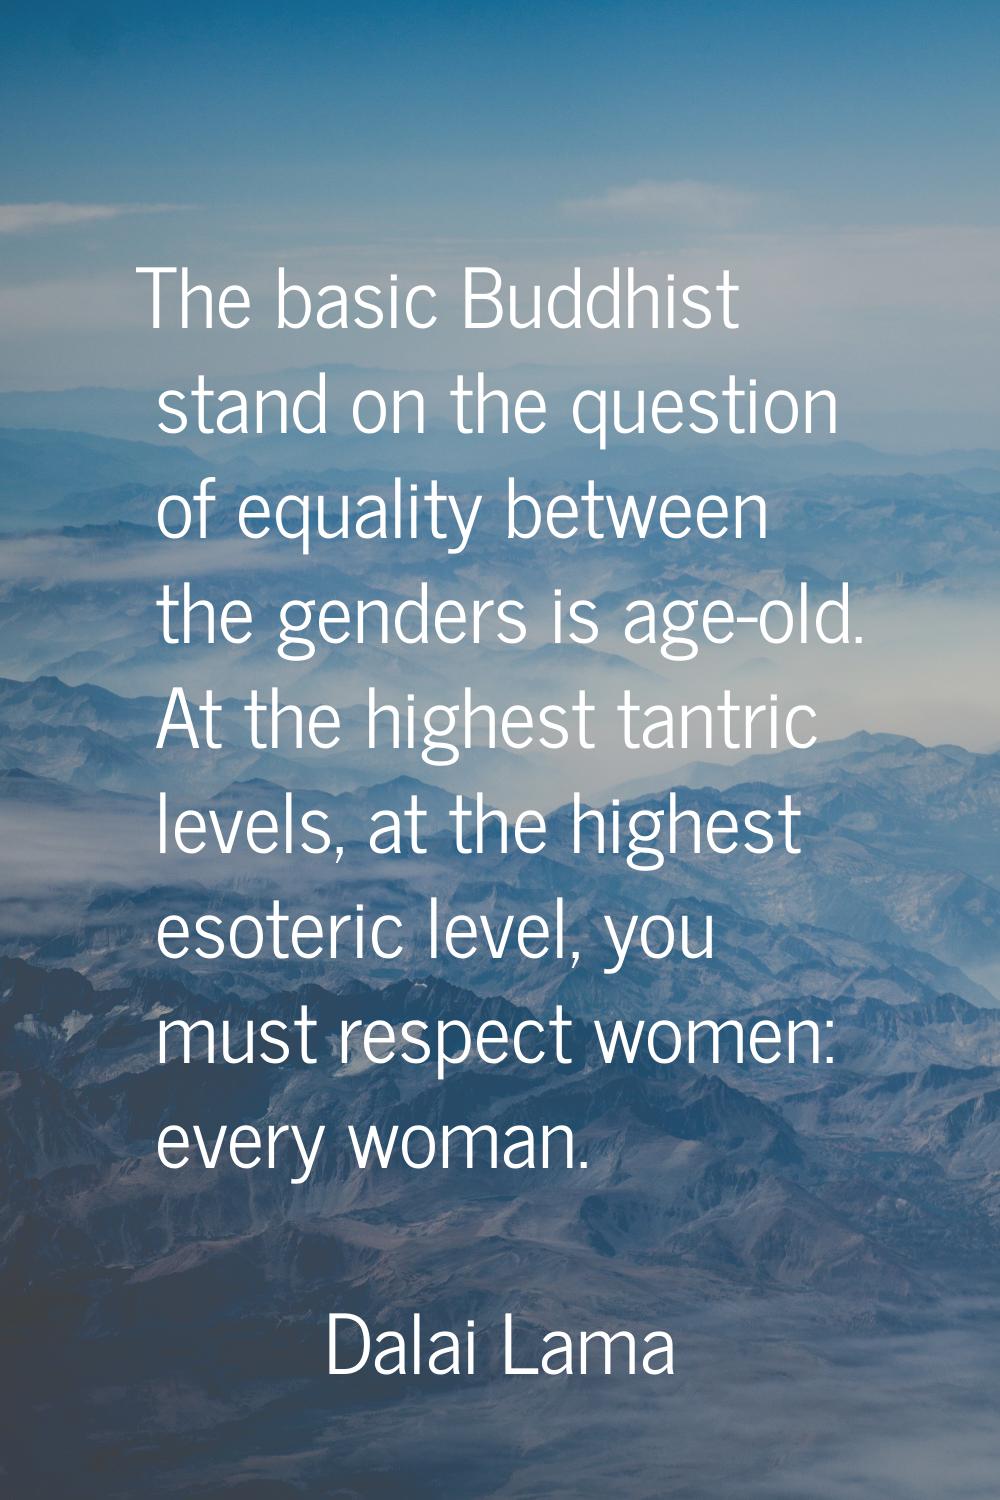 The basic Buddhist stand on the question of equality between the genders is age-old. At the highest